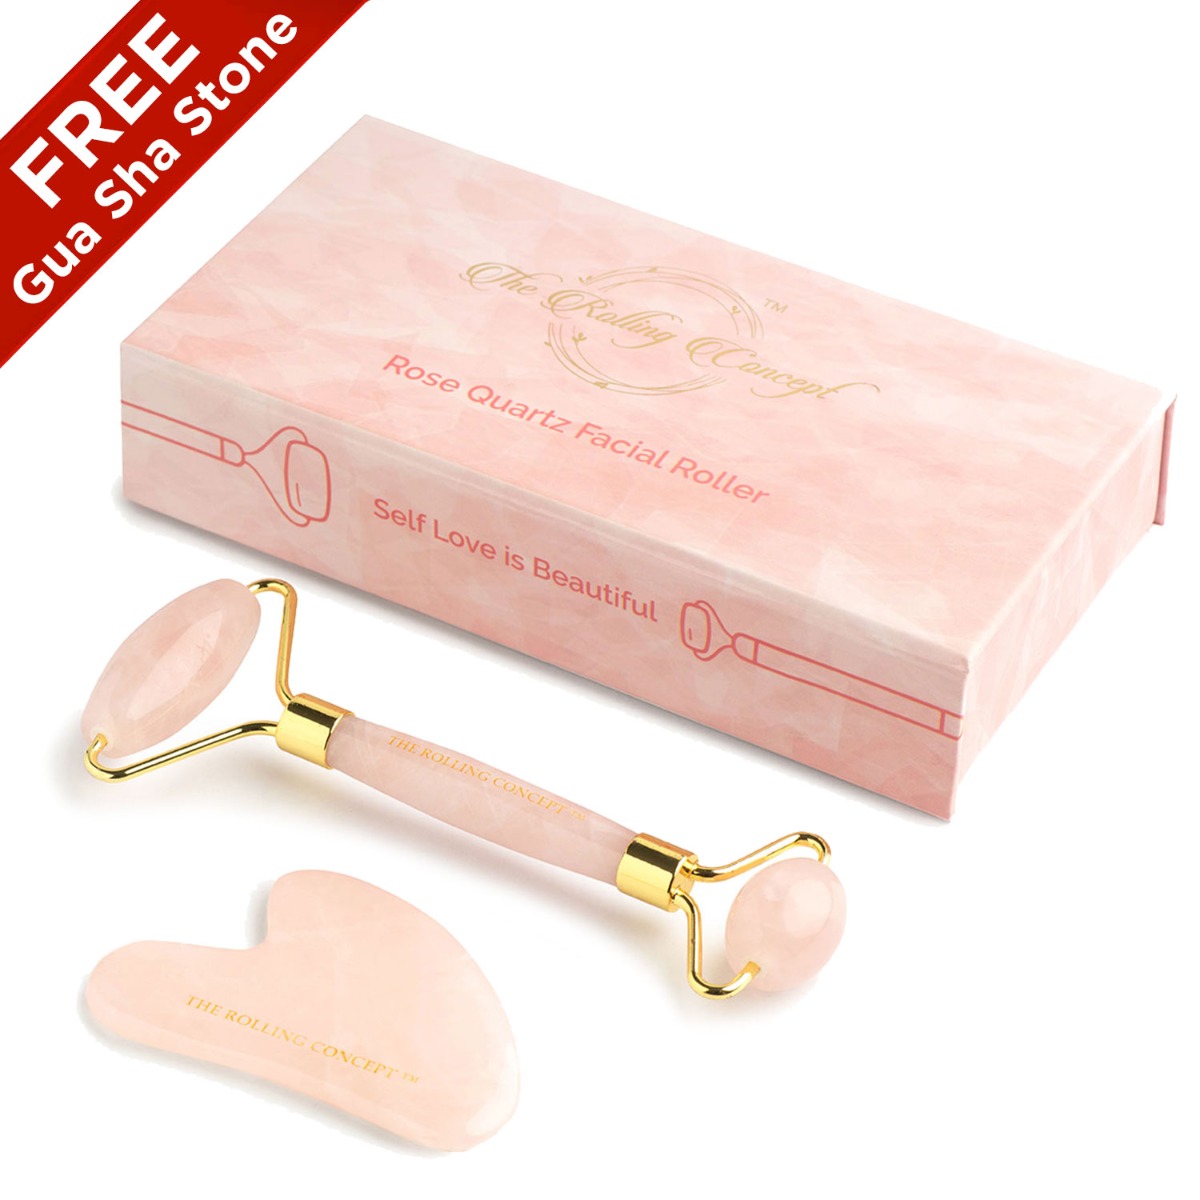 The Rolling Concept Rose Quartz Facial Roller with Free Rose Gua Sha Stone